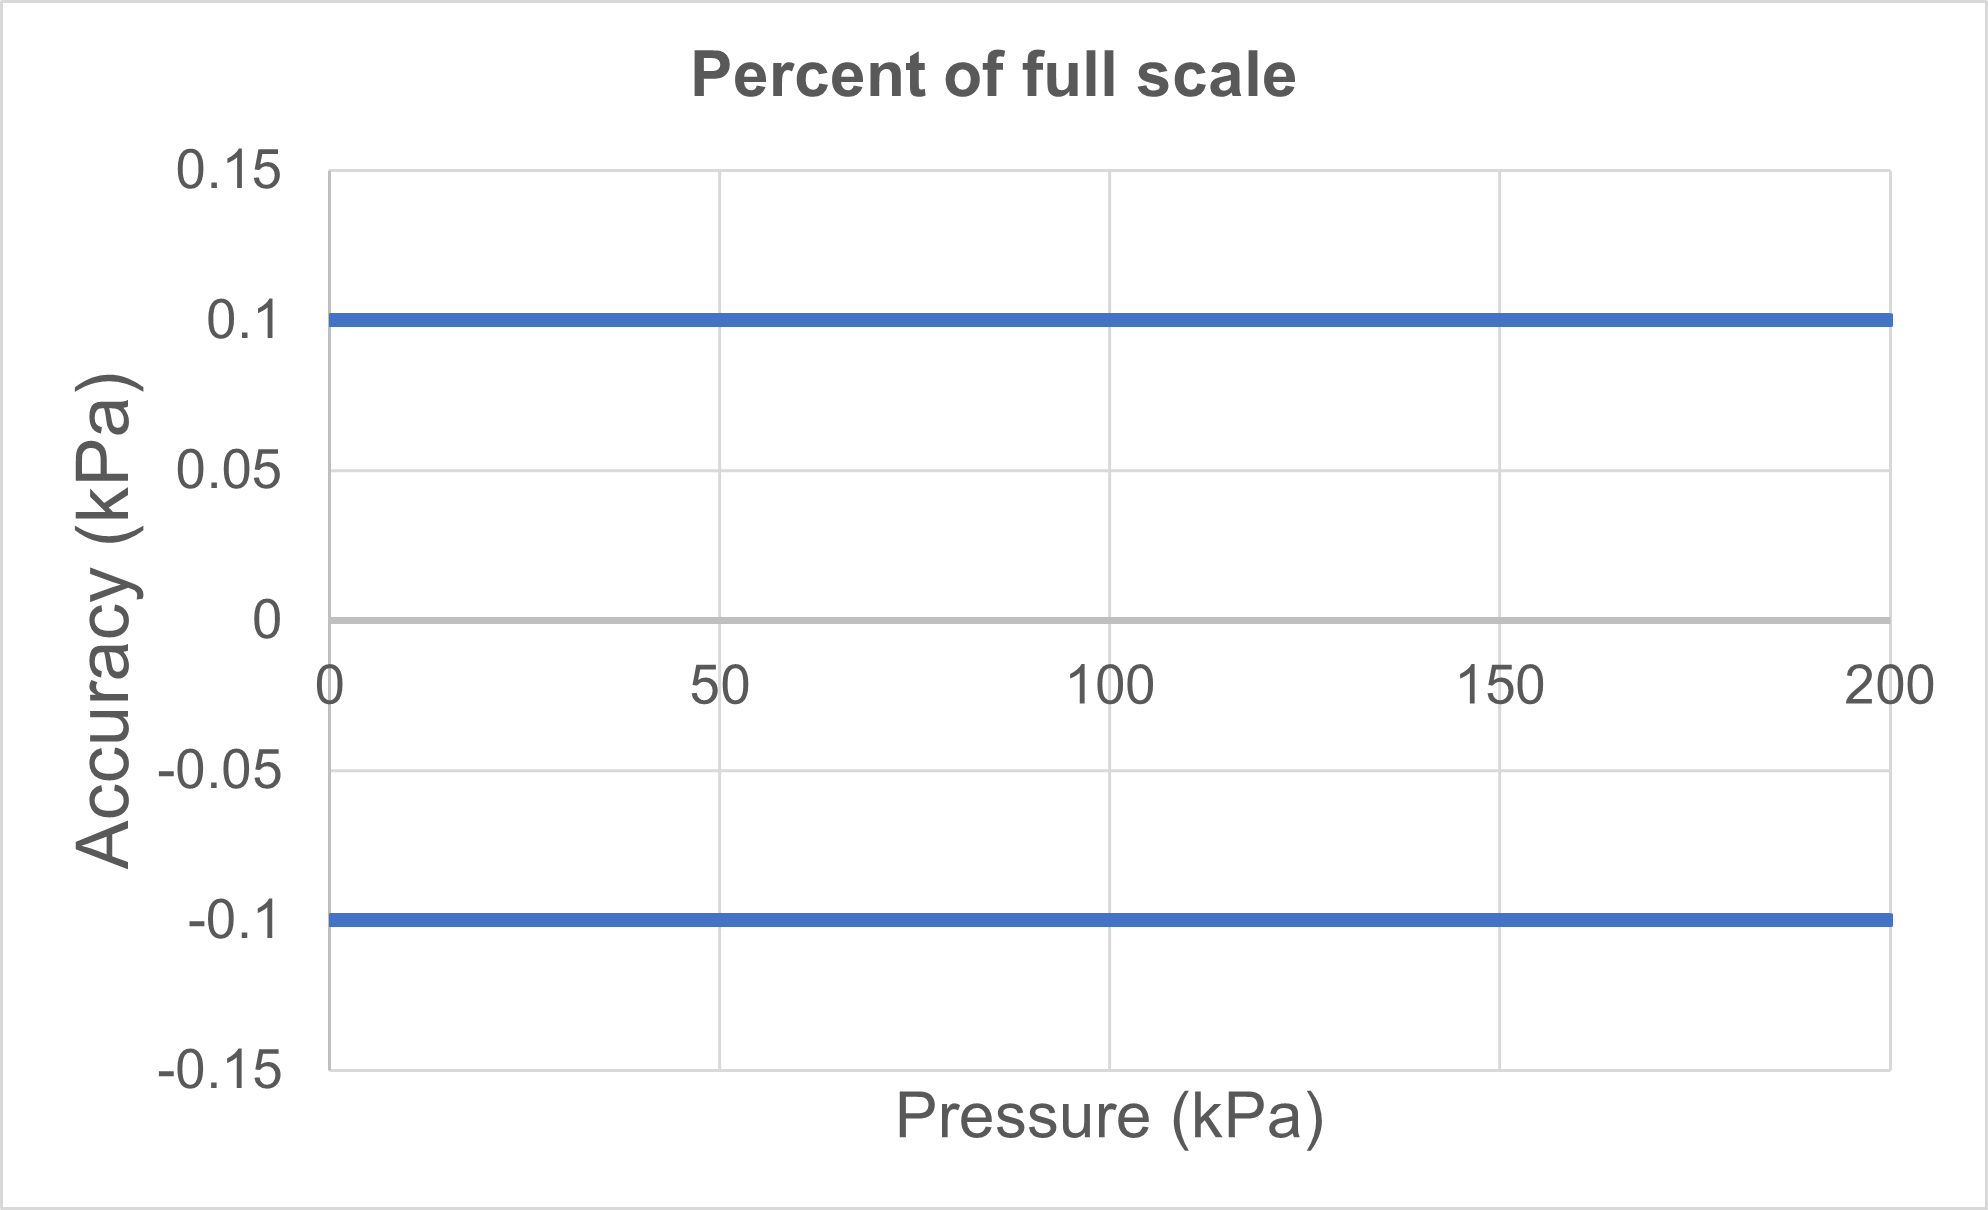 Percent of full scale accuracy specification.